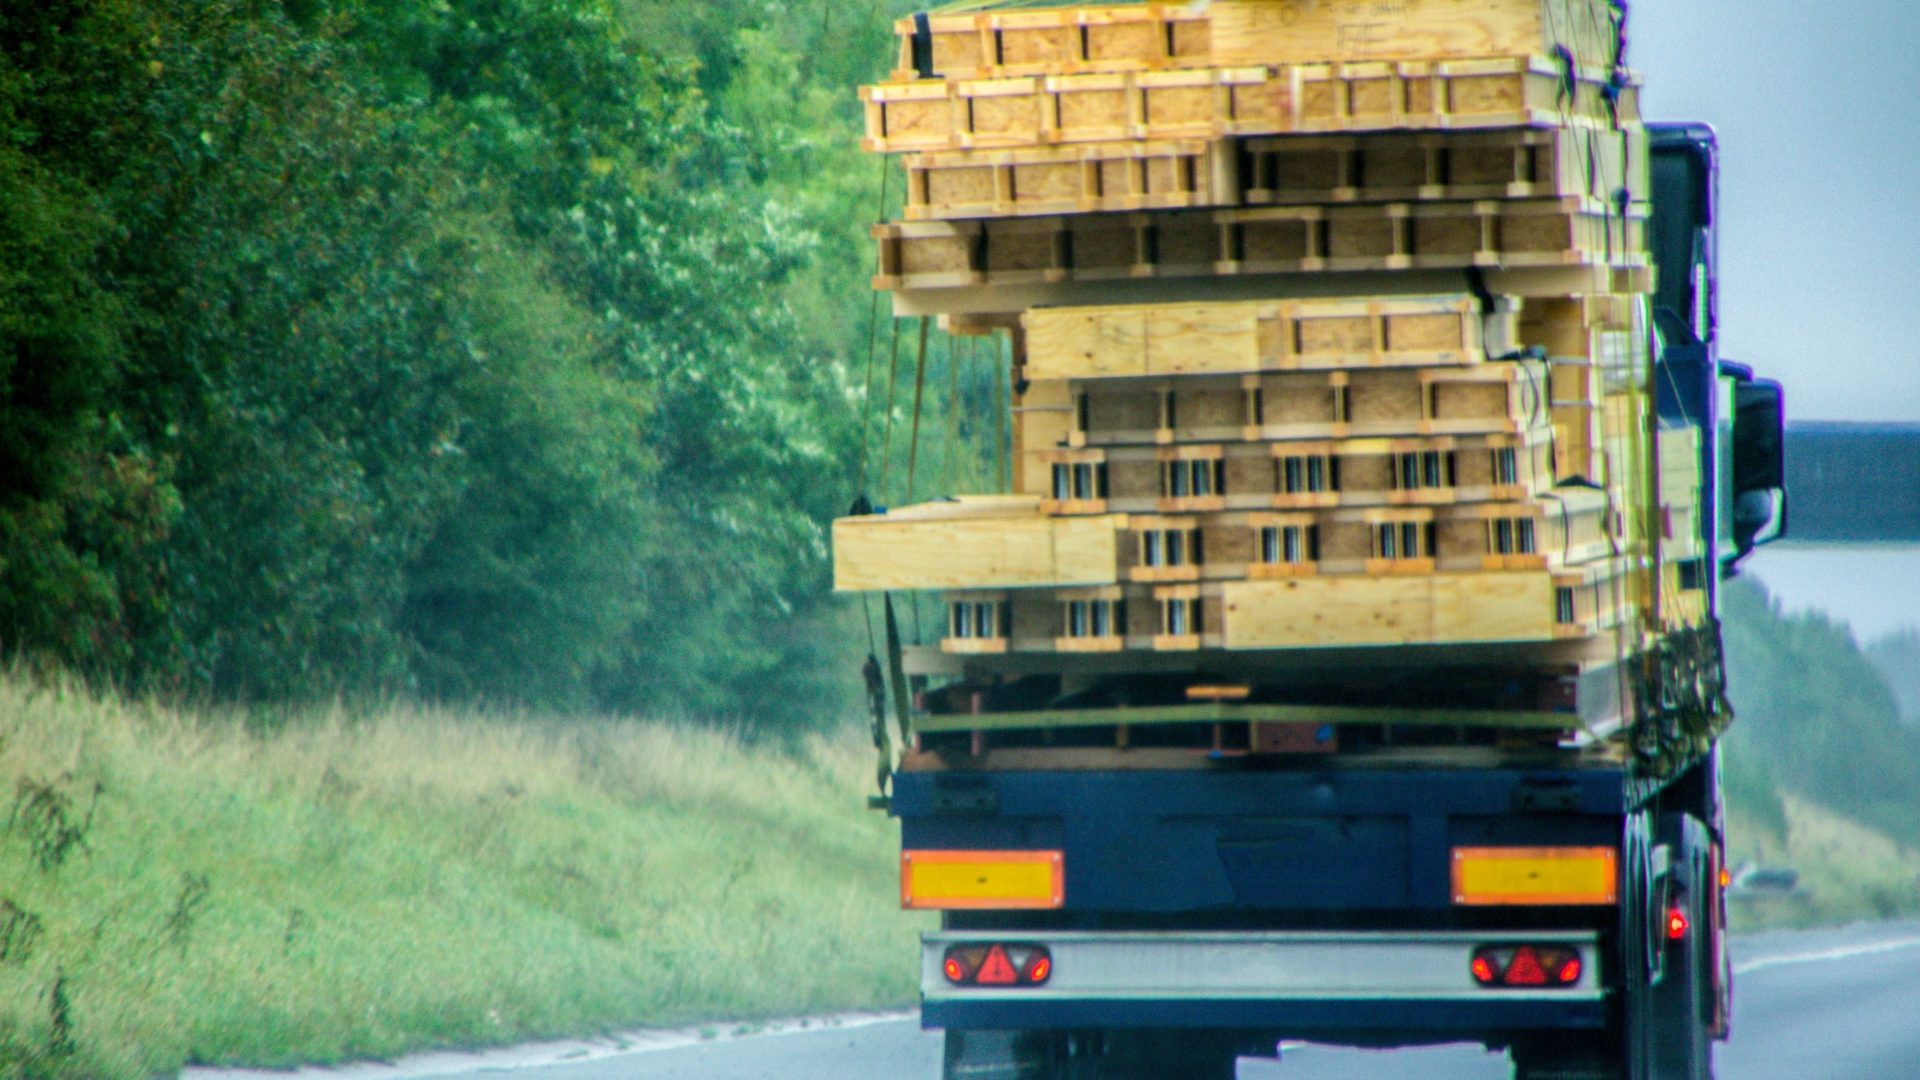 supply chain resilience - An articulated lorry carrying timber on a motorway.